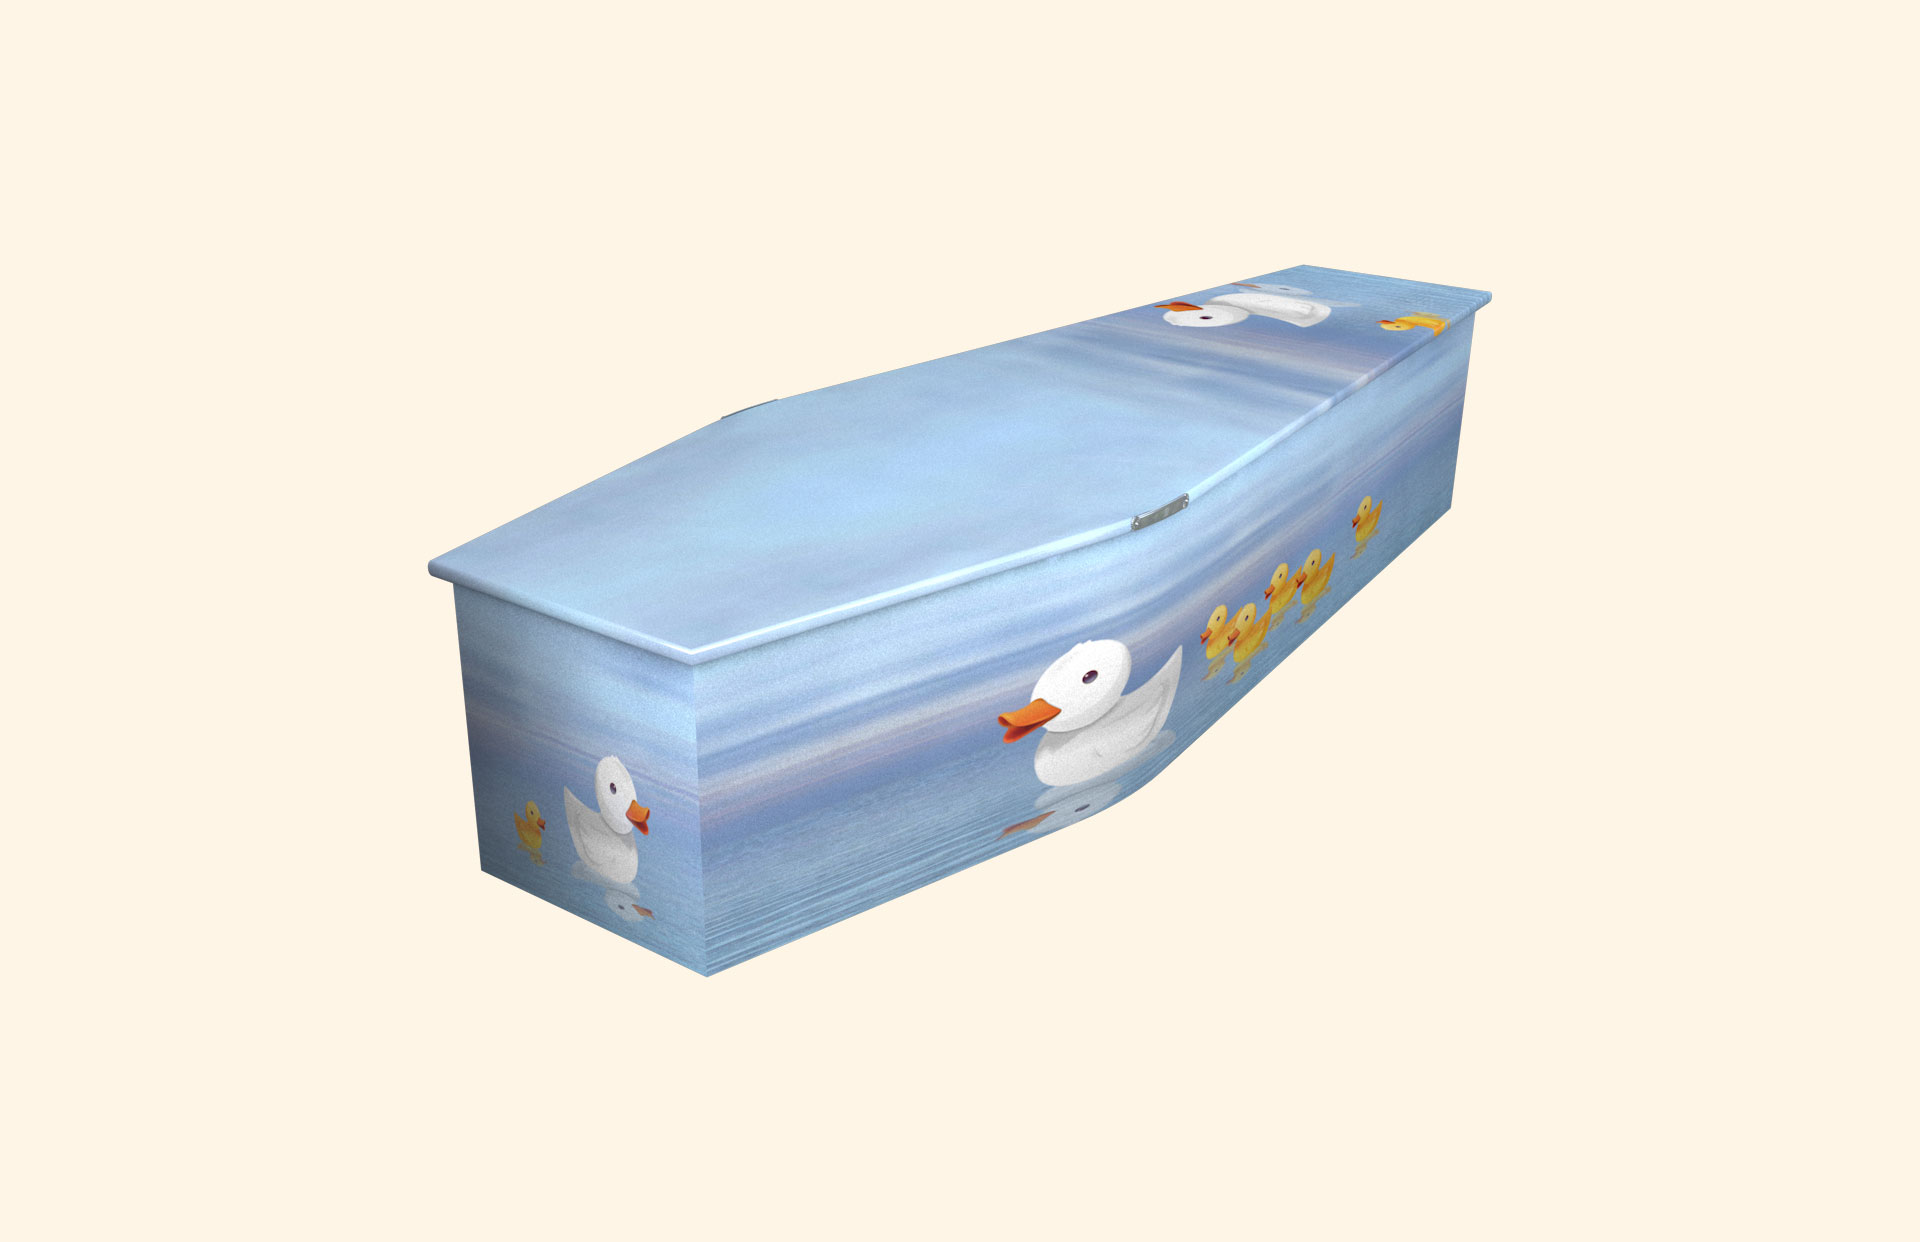 Ducklings design on a child coffin